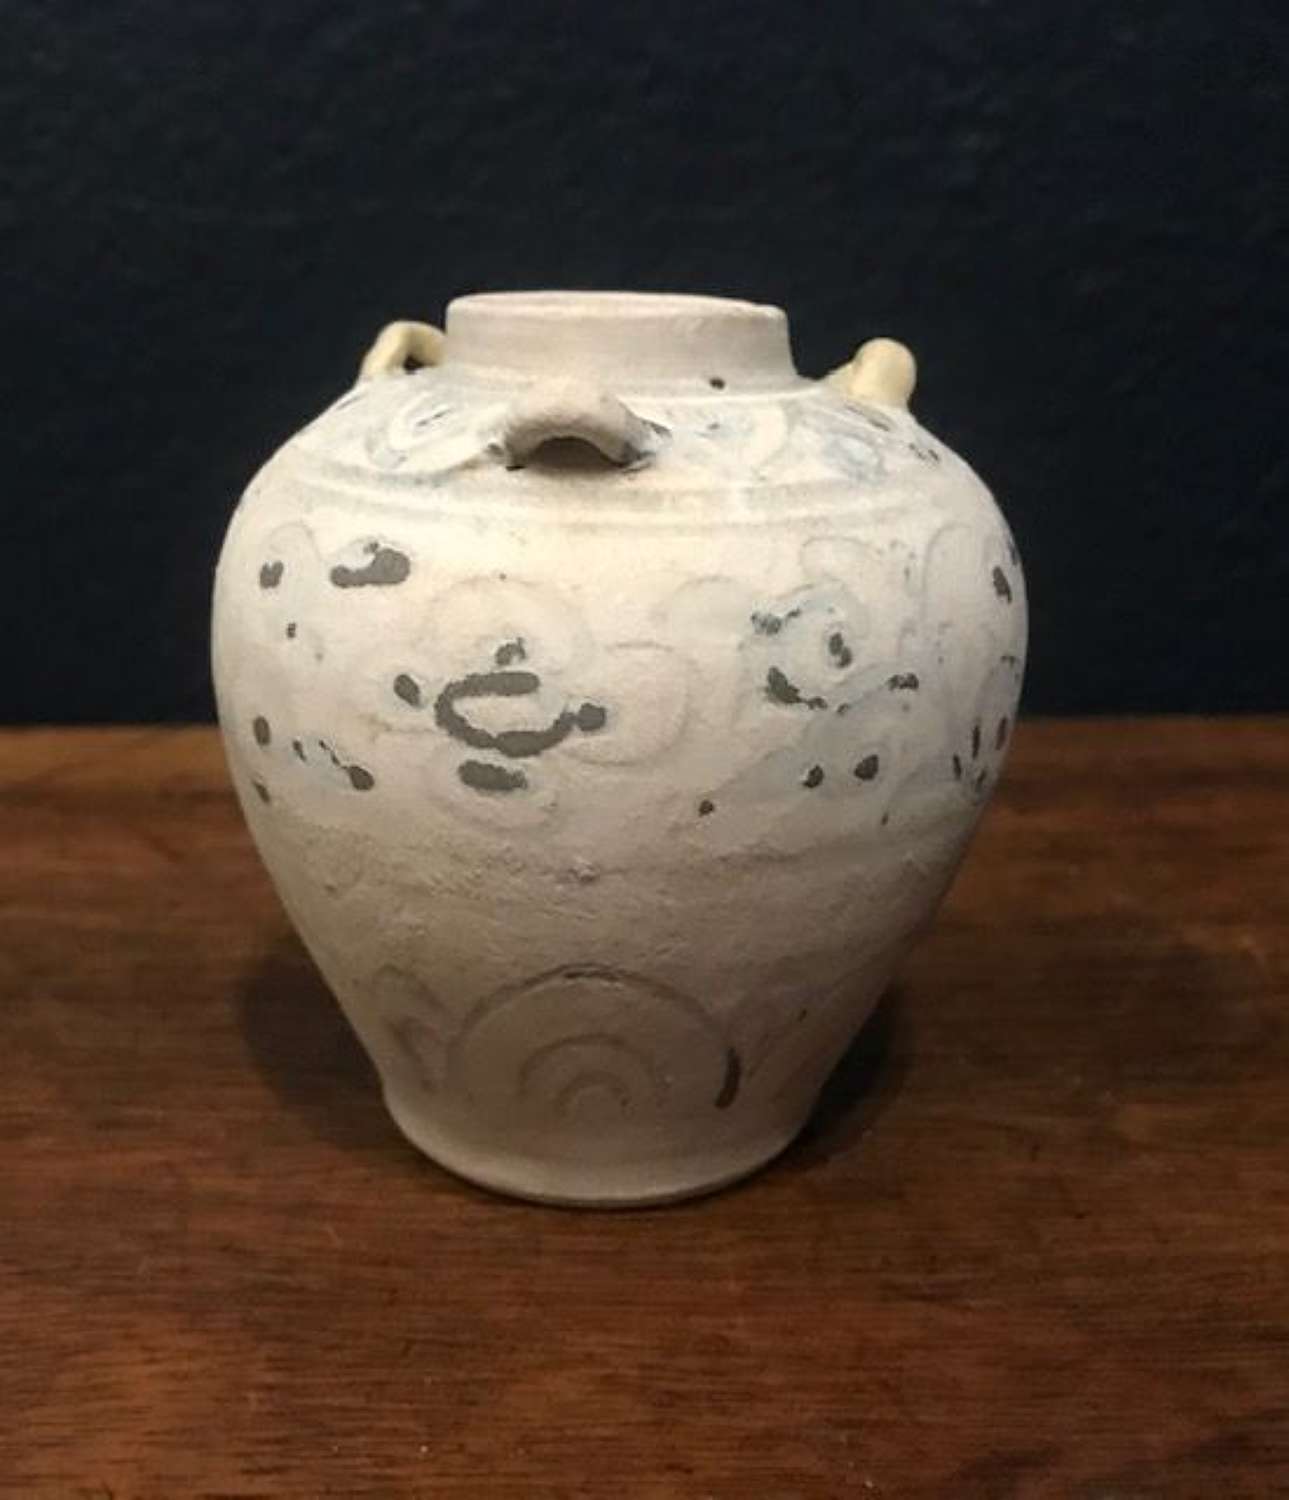 Rare 15th c. blue and white jarlet with handles - Hoi An Hoard